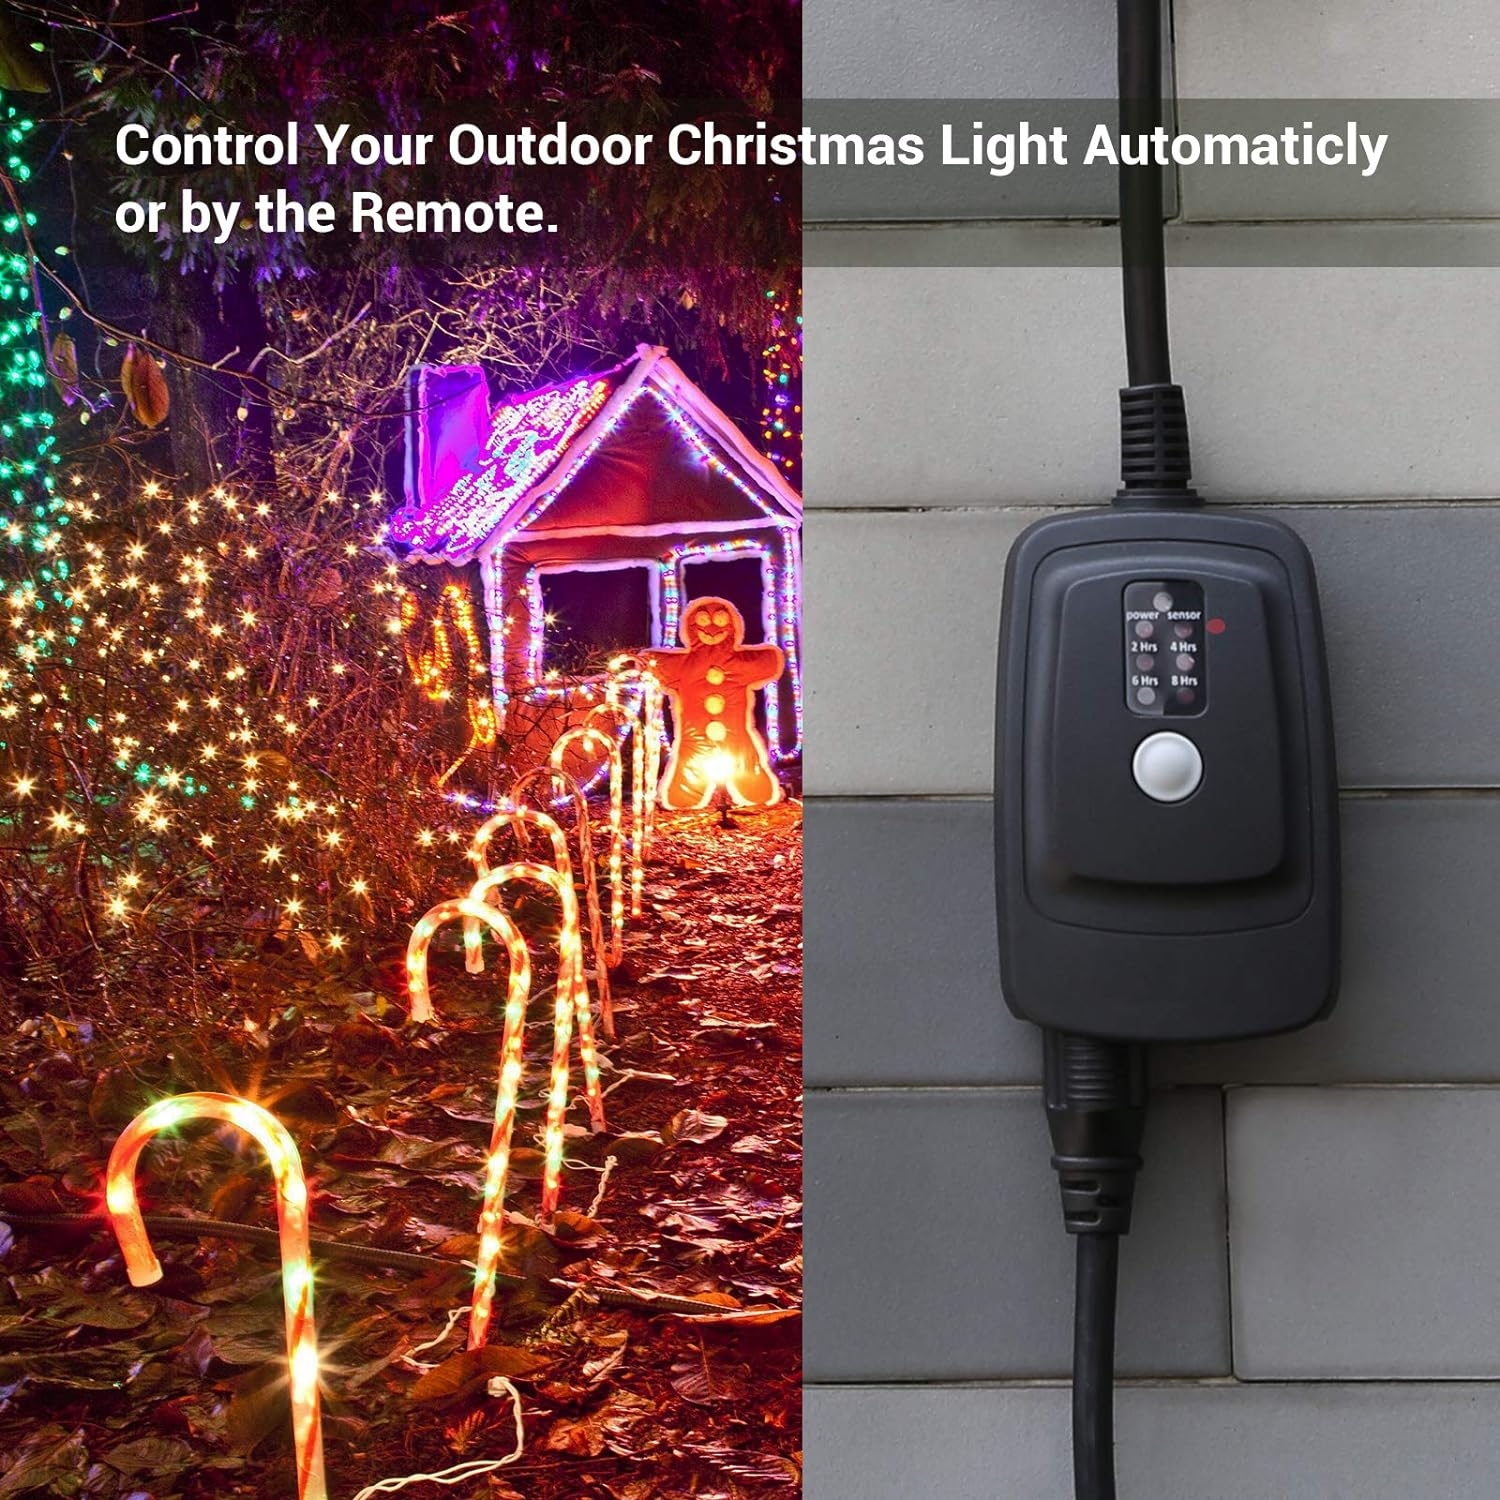 DEWENWILS Outdoor Light Timer Waterproof, Plug in Sensor Outlet Timer Switch, 100 ft Range Remote Control with 2 Grounded Electrical Outlets for Yard Landscape Holiday Light, 15A 1/2HP UL Listed